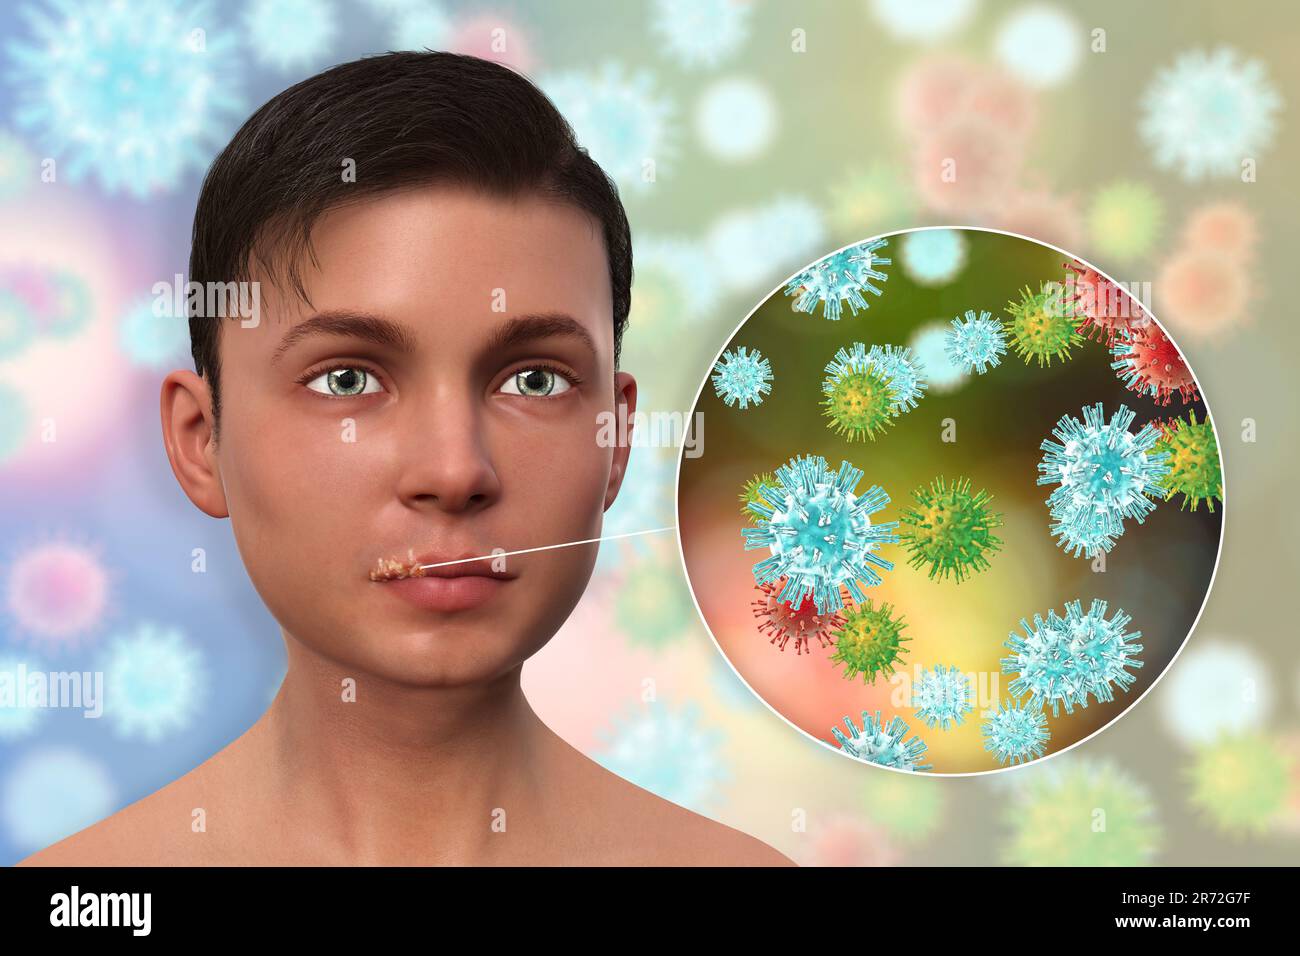 Cold sore on the lip of a teenage boy and closeup view of herpes simplex viruses, computer illustration. Cold sores are painful, fluid-filled blisters Stock Photo